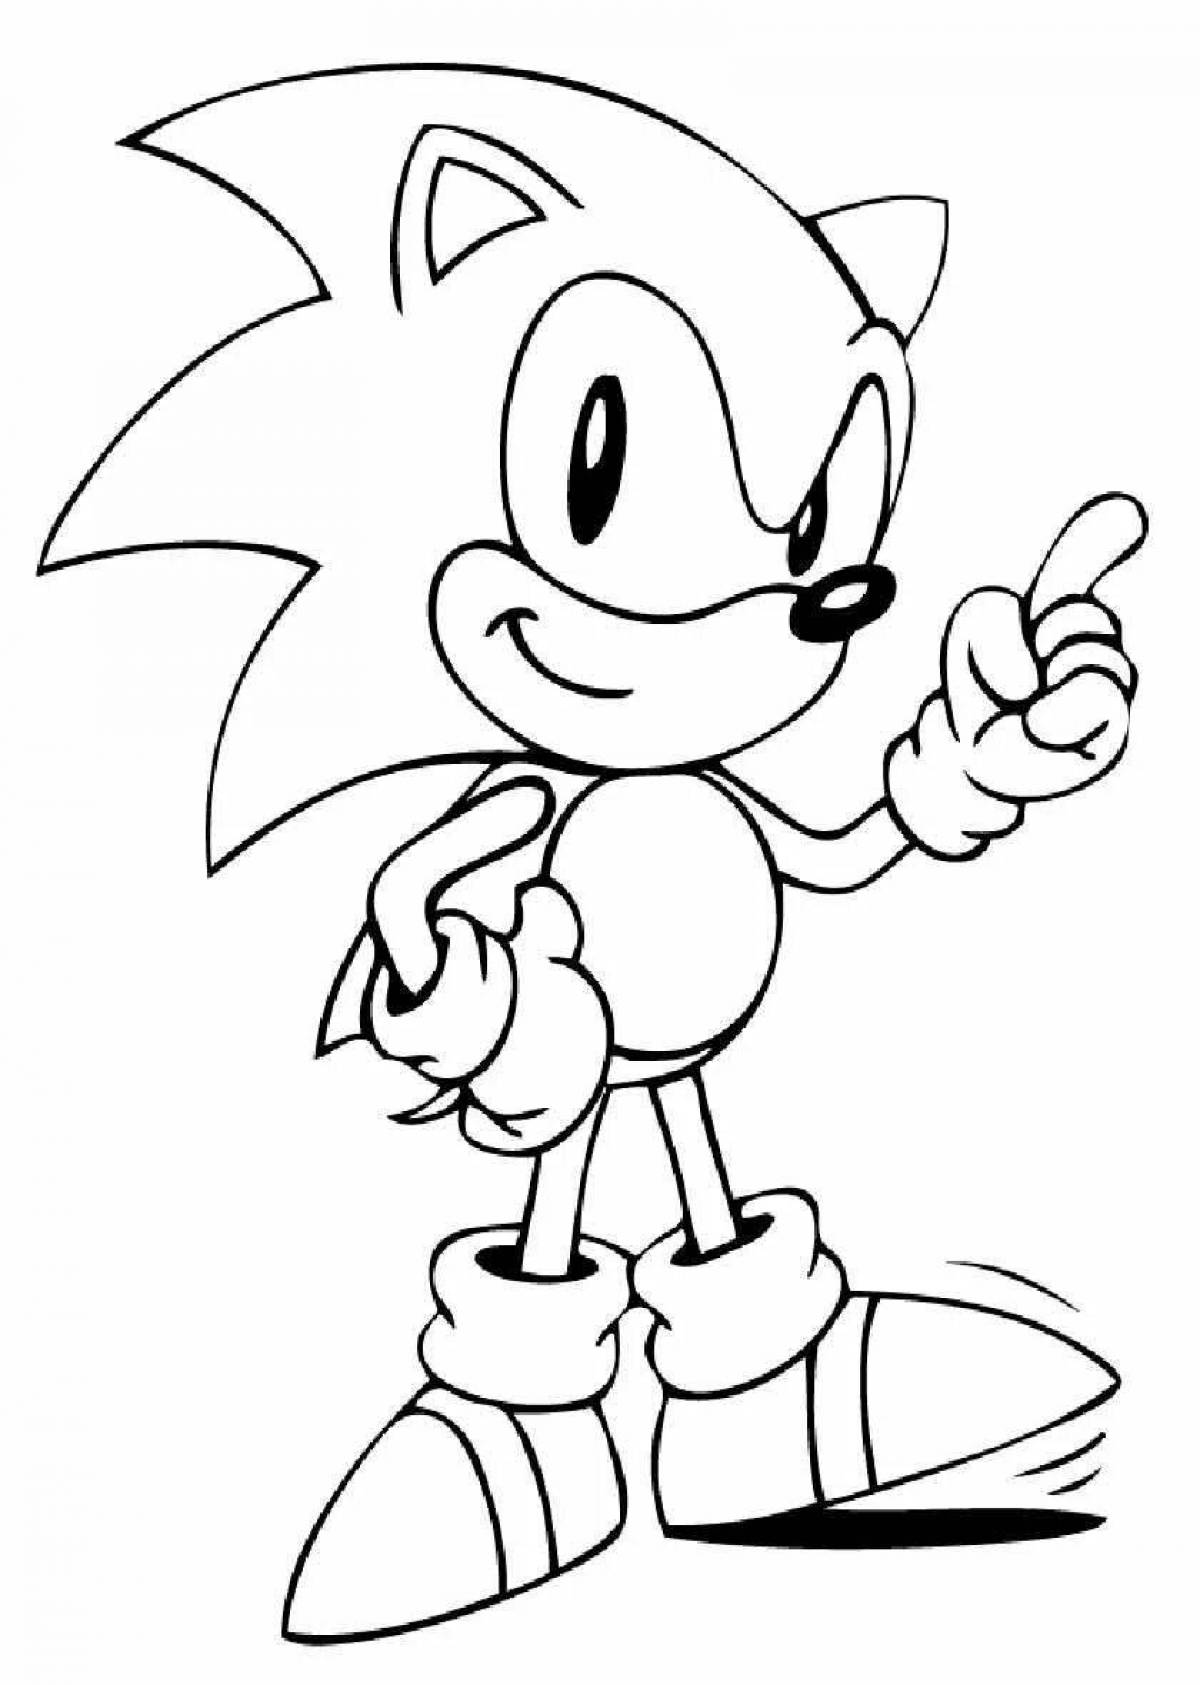 Exciting super sonic coloring book